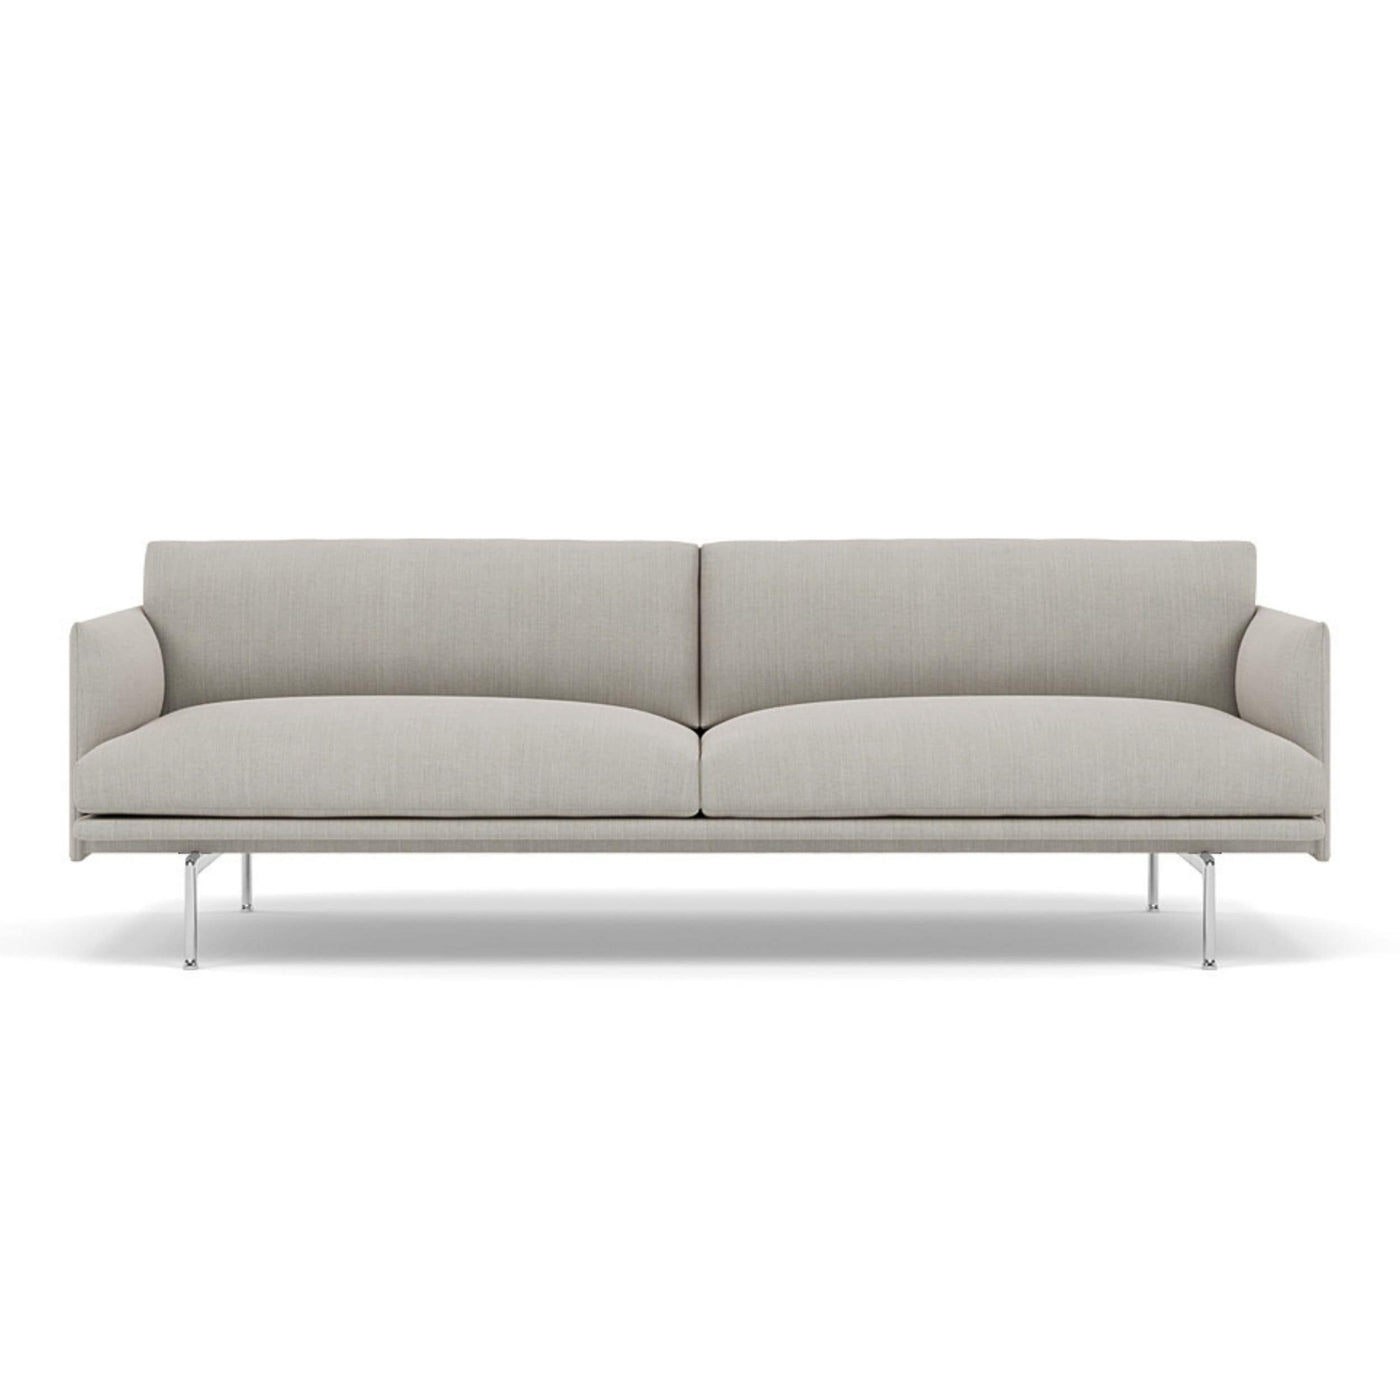 Muuto outline 3 seater sofa with polished aluminium legs. Made to order from someday designs. #colour_fiord-201